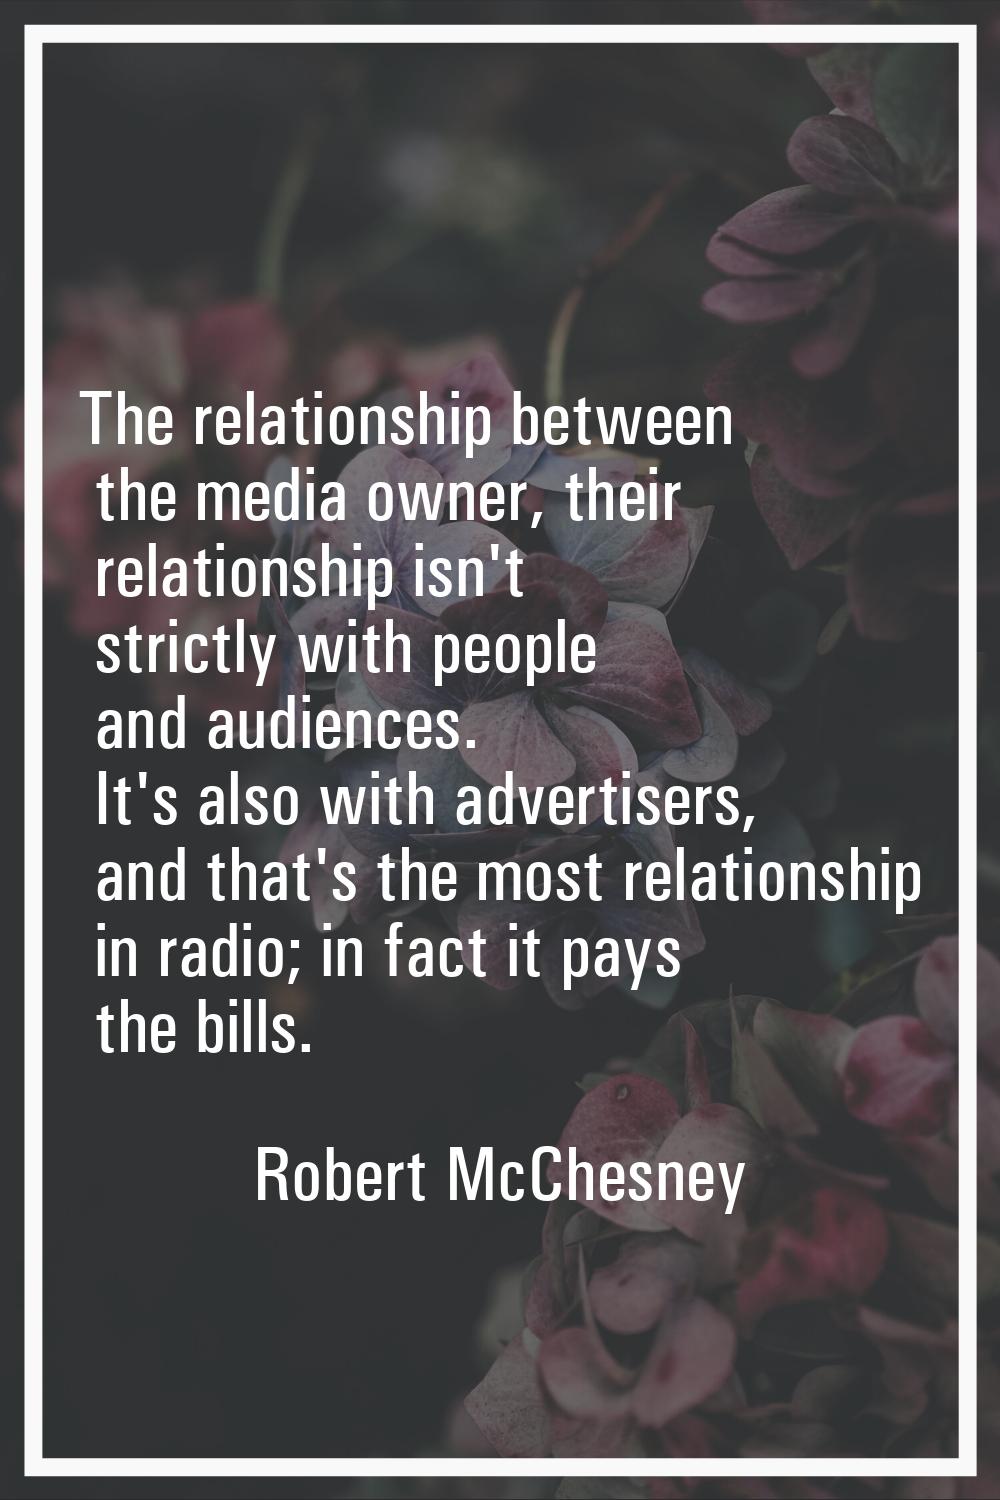 The relationship between the media owner, their relationship isn't strictly with people and audienc